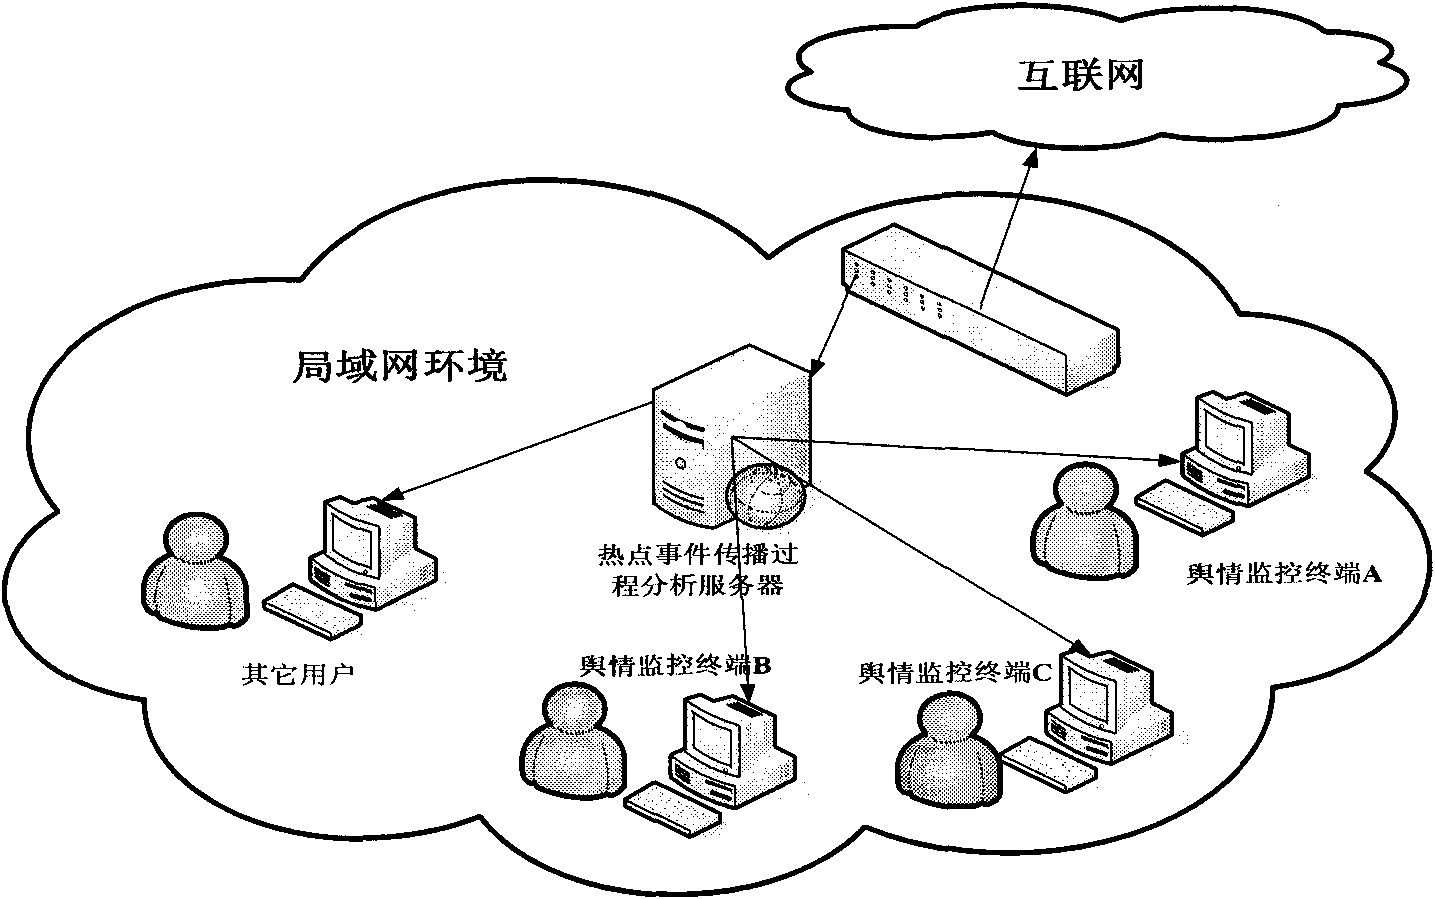 Device and method for constructing forum event dissemination pattern